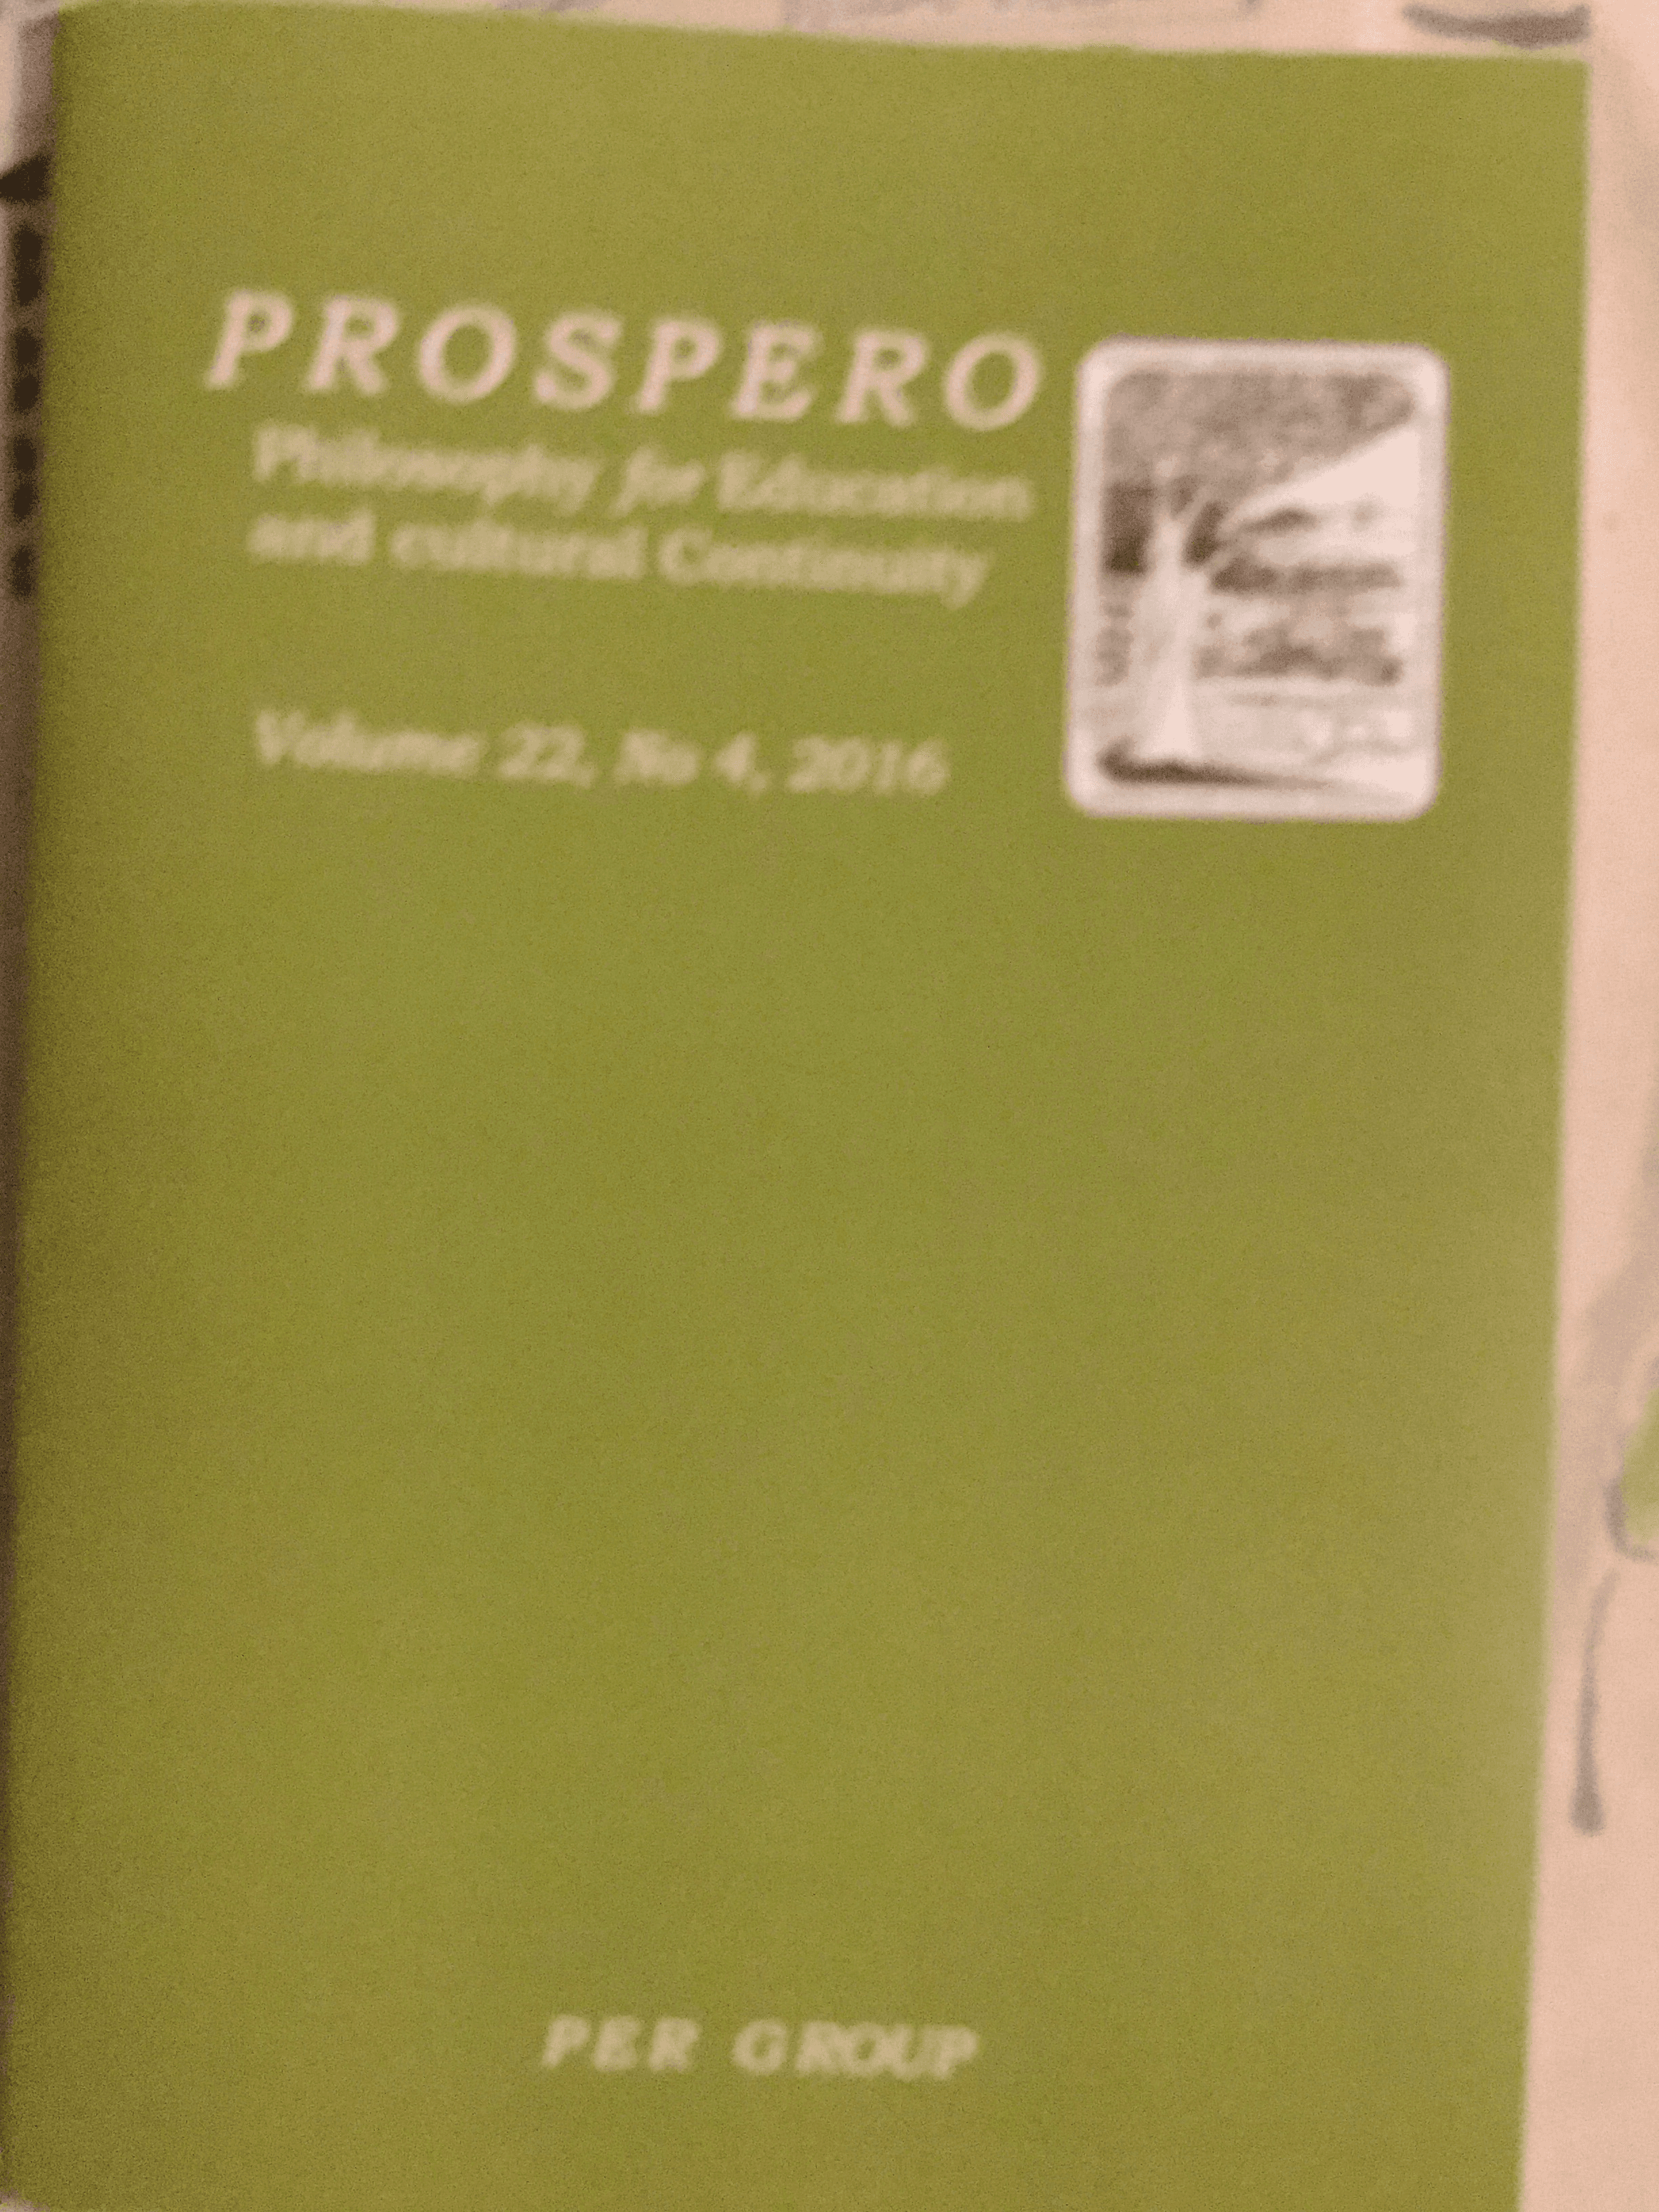 book with a green cover